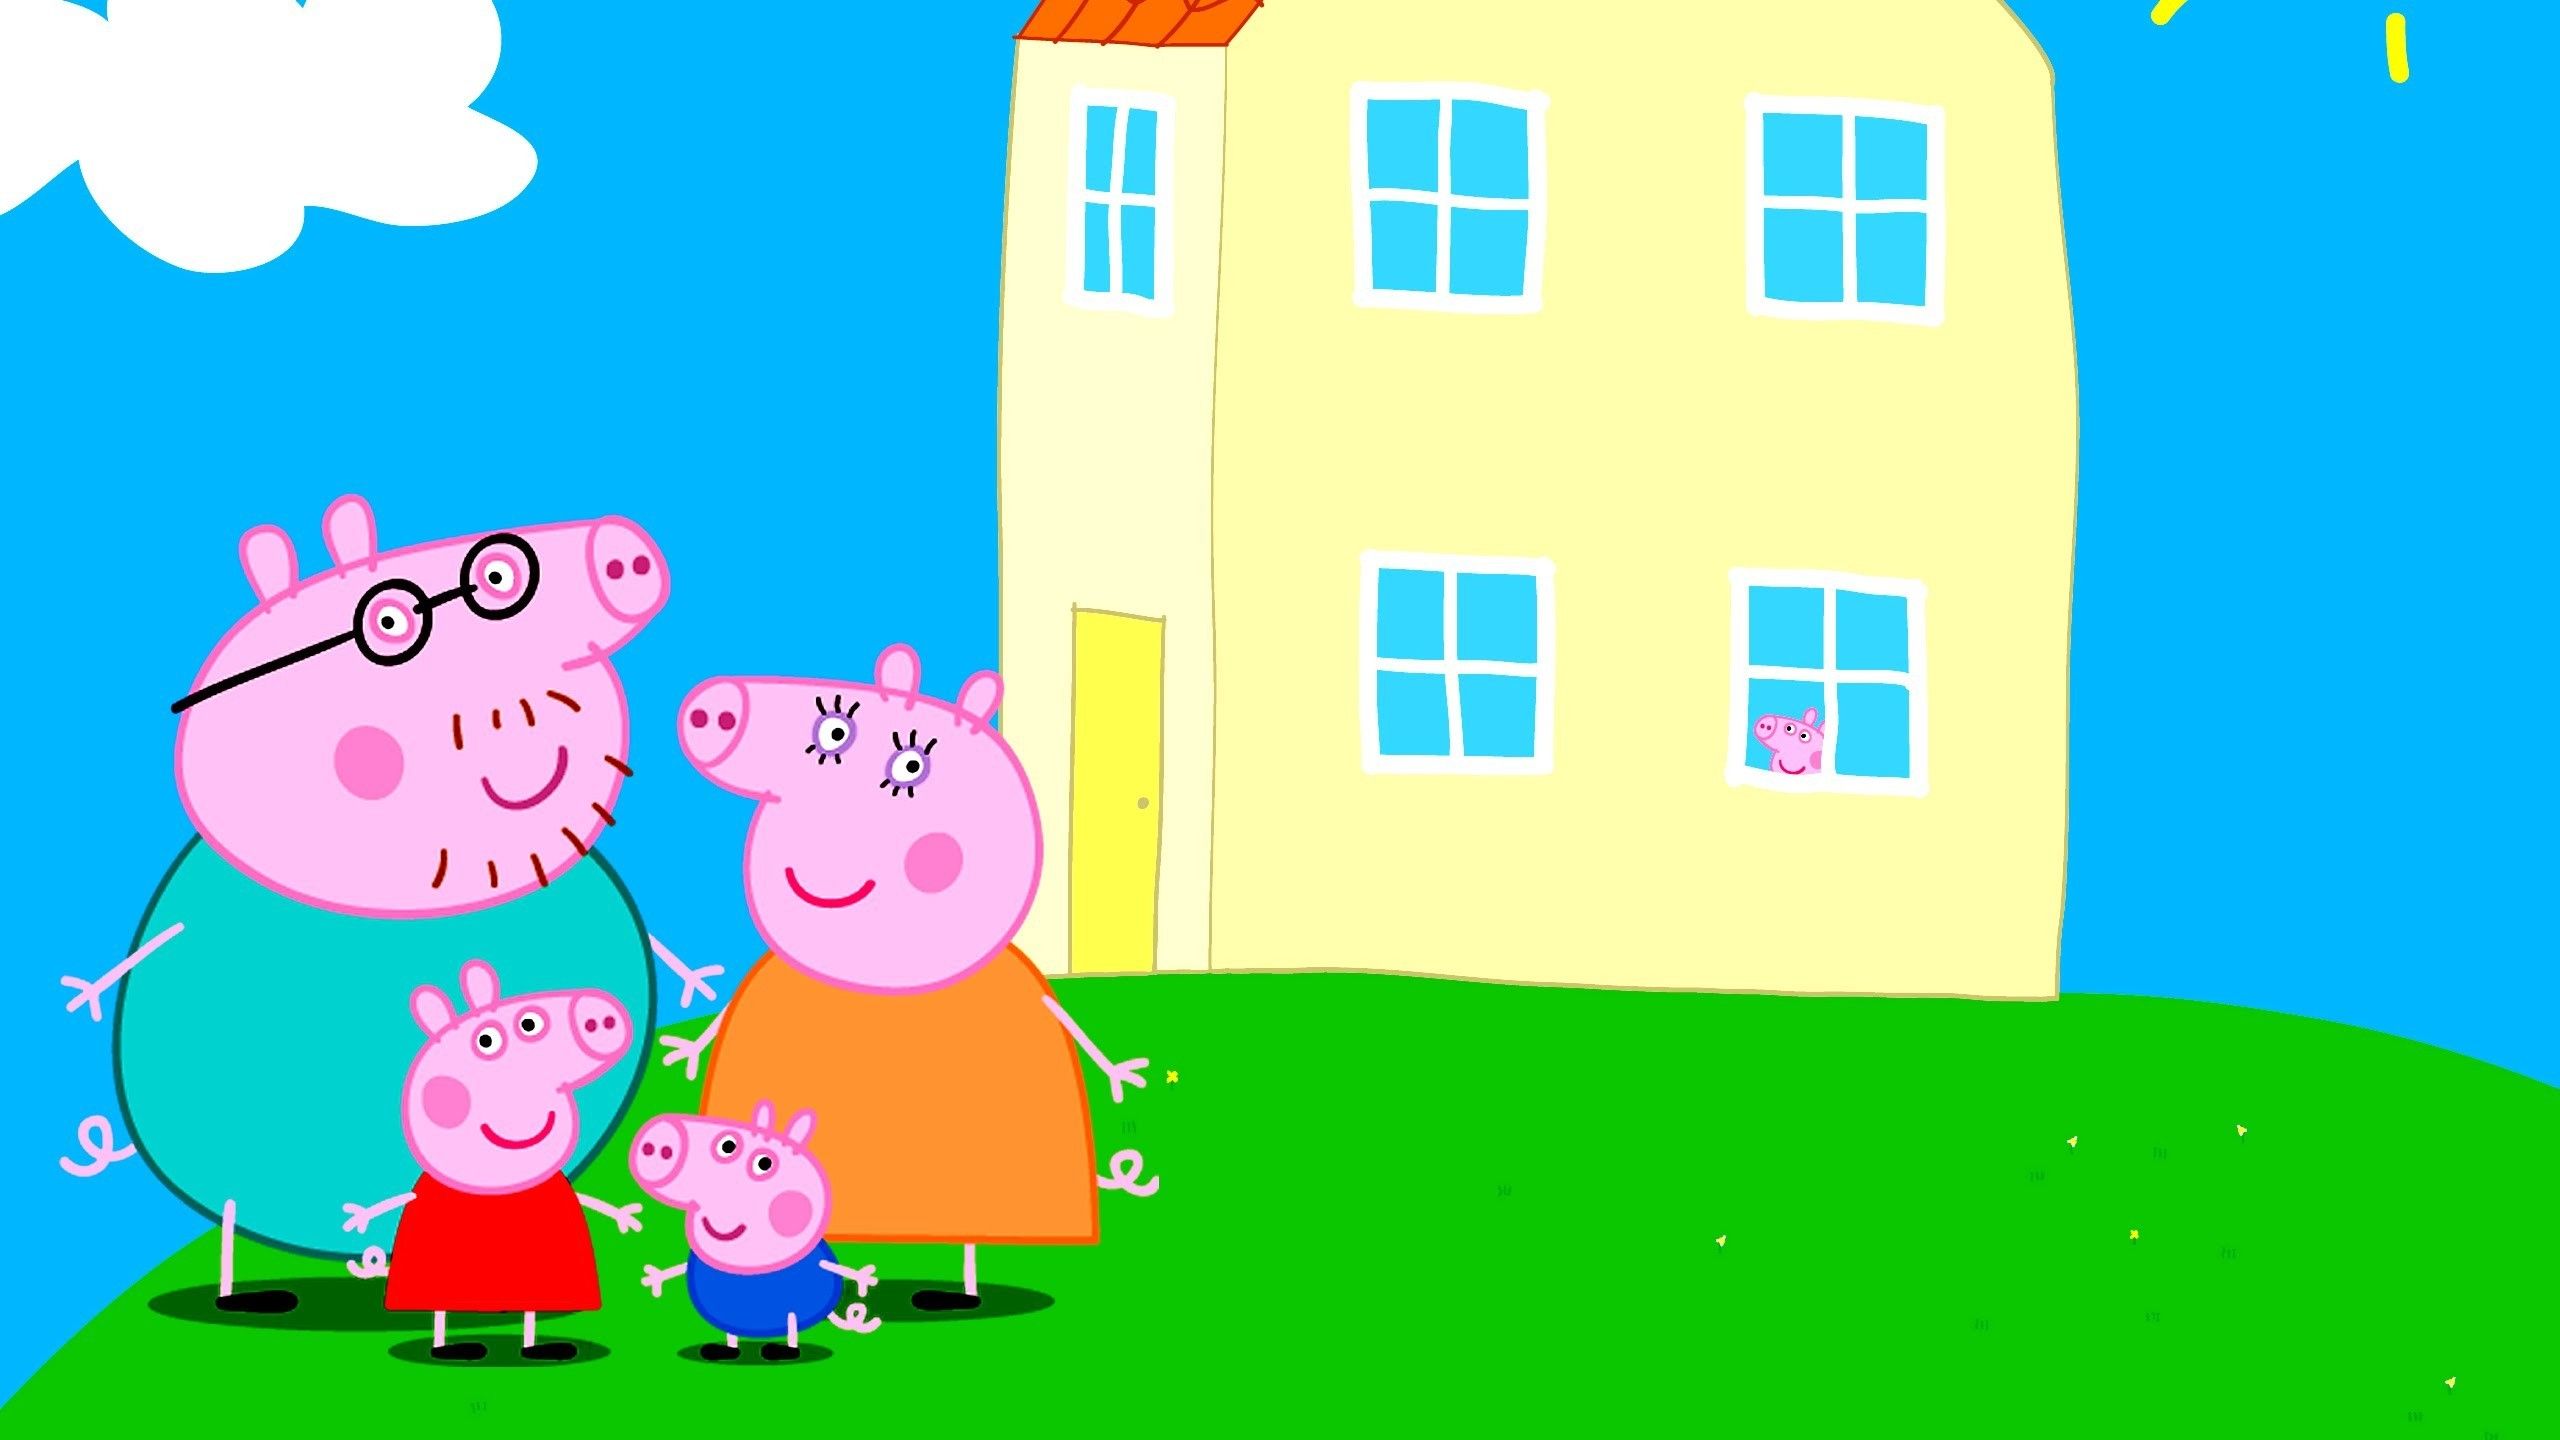 Free download Peppa Pig Background 96 Wallpaper HD Wallpaper Peppa pig [2560x1440] for your Desktop, Mobile & Tablet. Explore Peppa Pig House HD Wallpaper. Guinea Pig Wallpaper, Pig Wallpaper, Guinea Pig Wallpaper